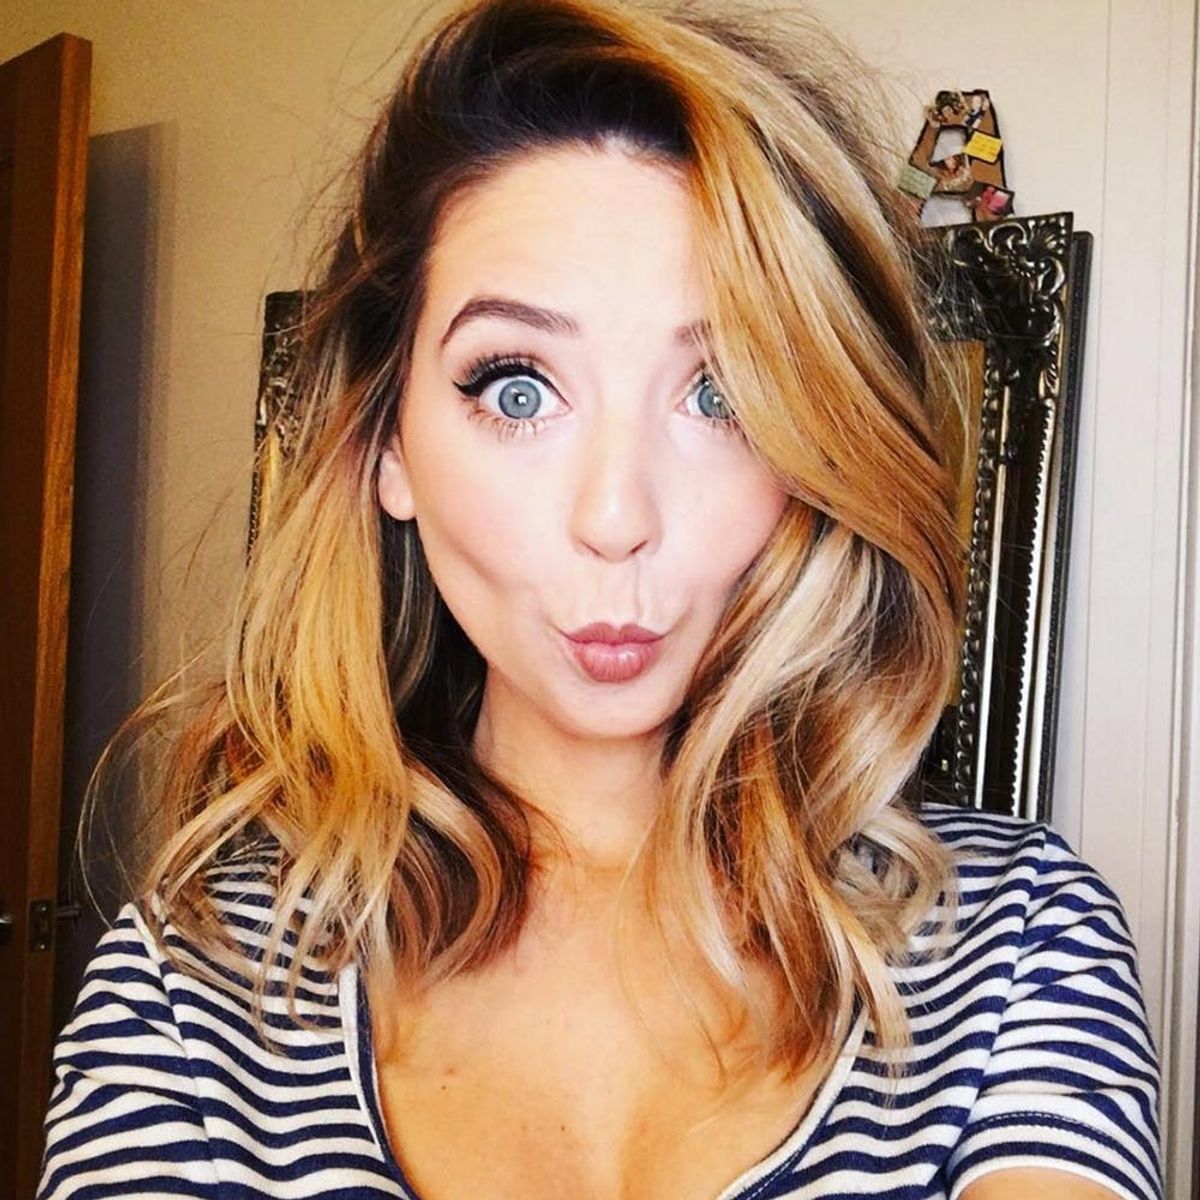 YouTube Beauty Vlogger Zoella Just Showed Us How to Make Granny Hair Look Cool